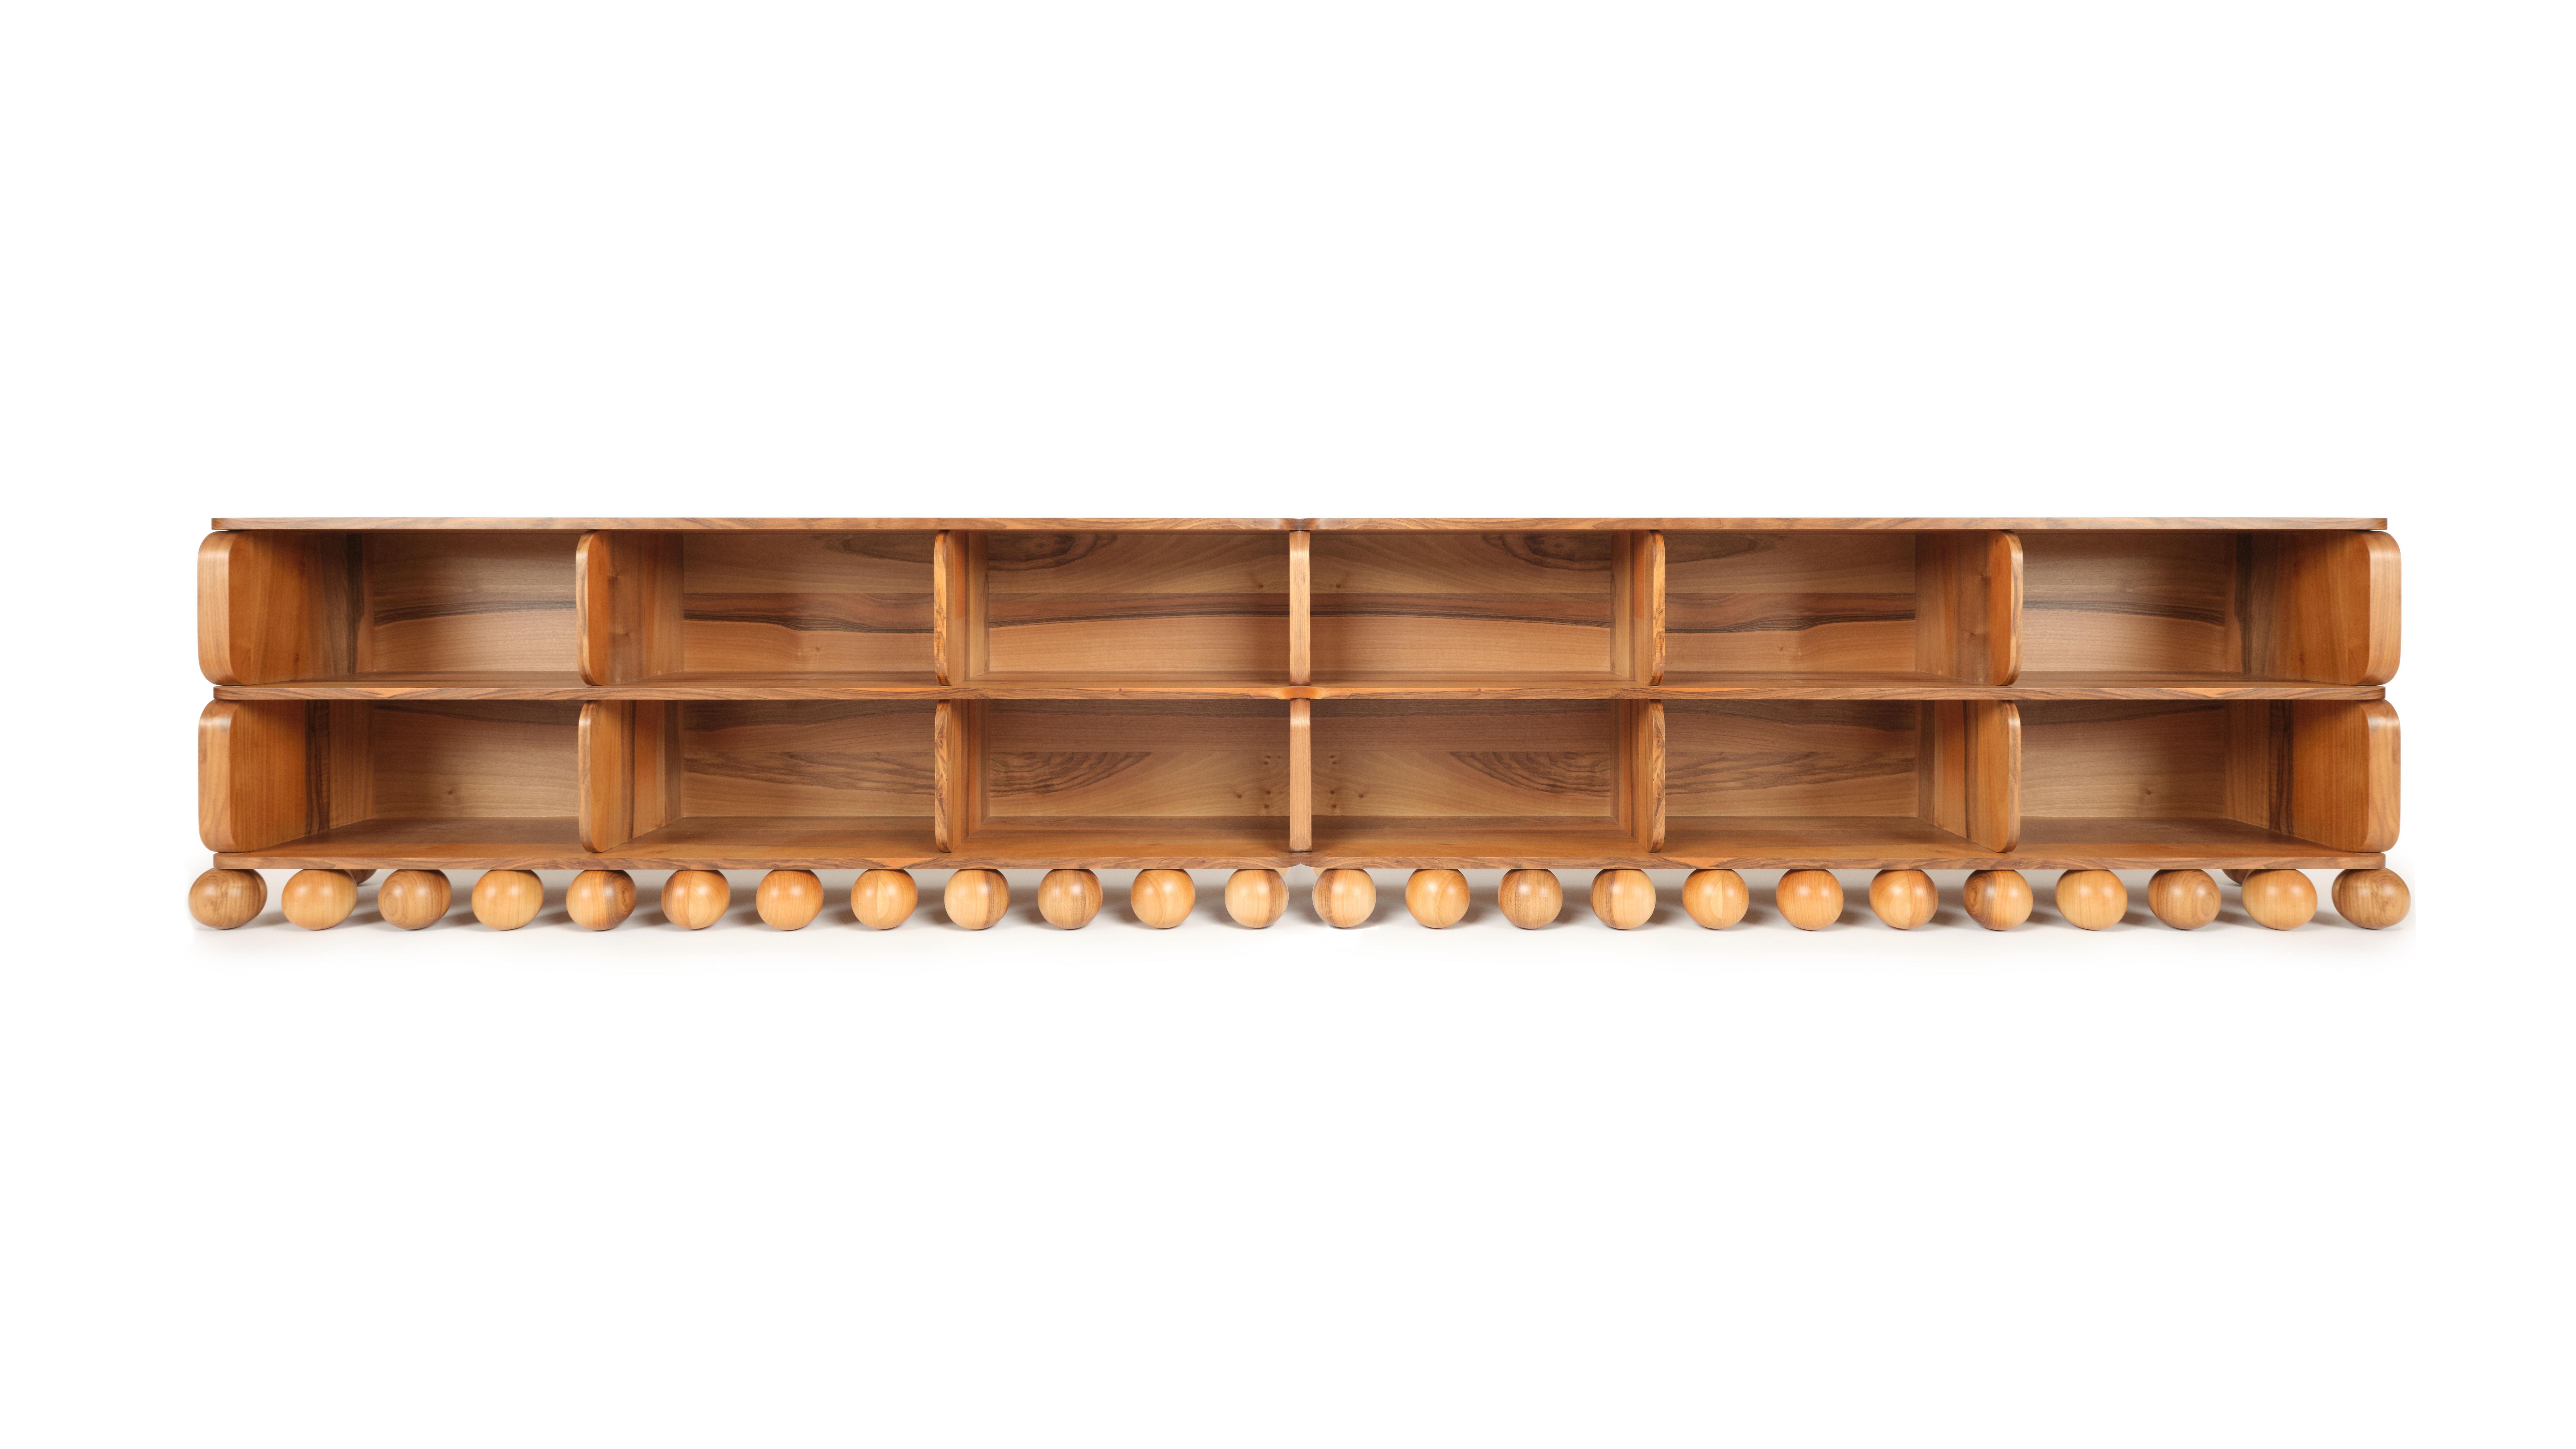 24-Legged Bookcase can be located at various places in interiors according to usage. The size of the bookcase can be extended by adding modules. Each module is 150 cm length. The bookcase, which composed of two modules, has 24 wooden round legs. It